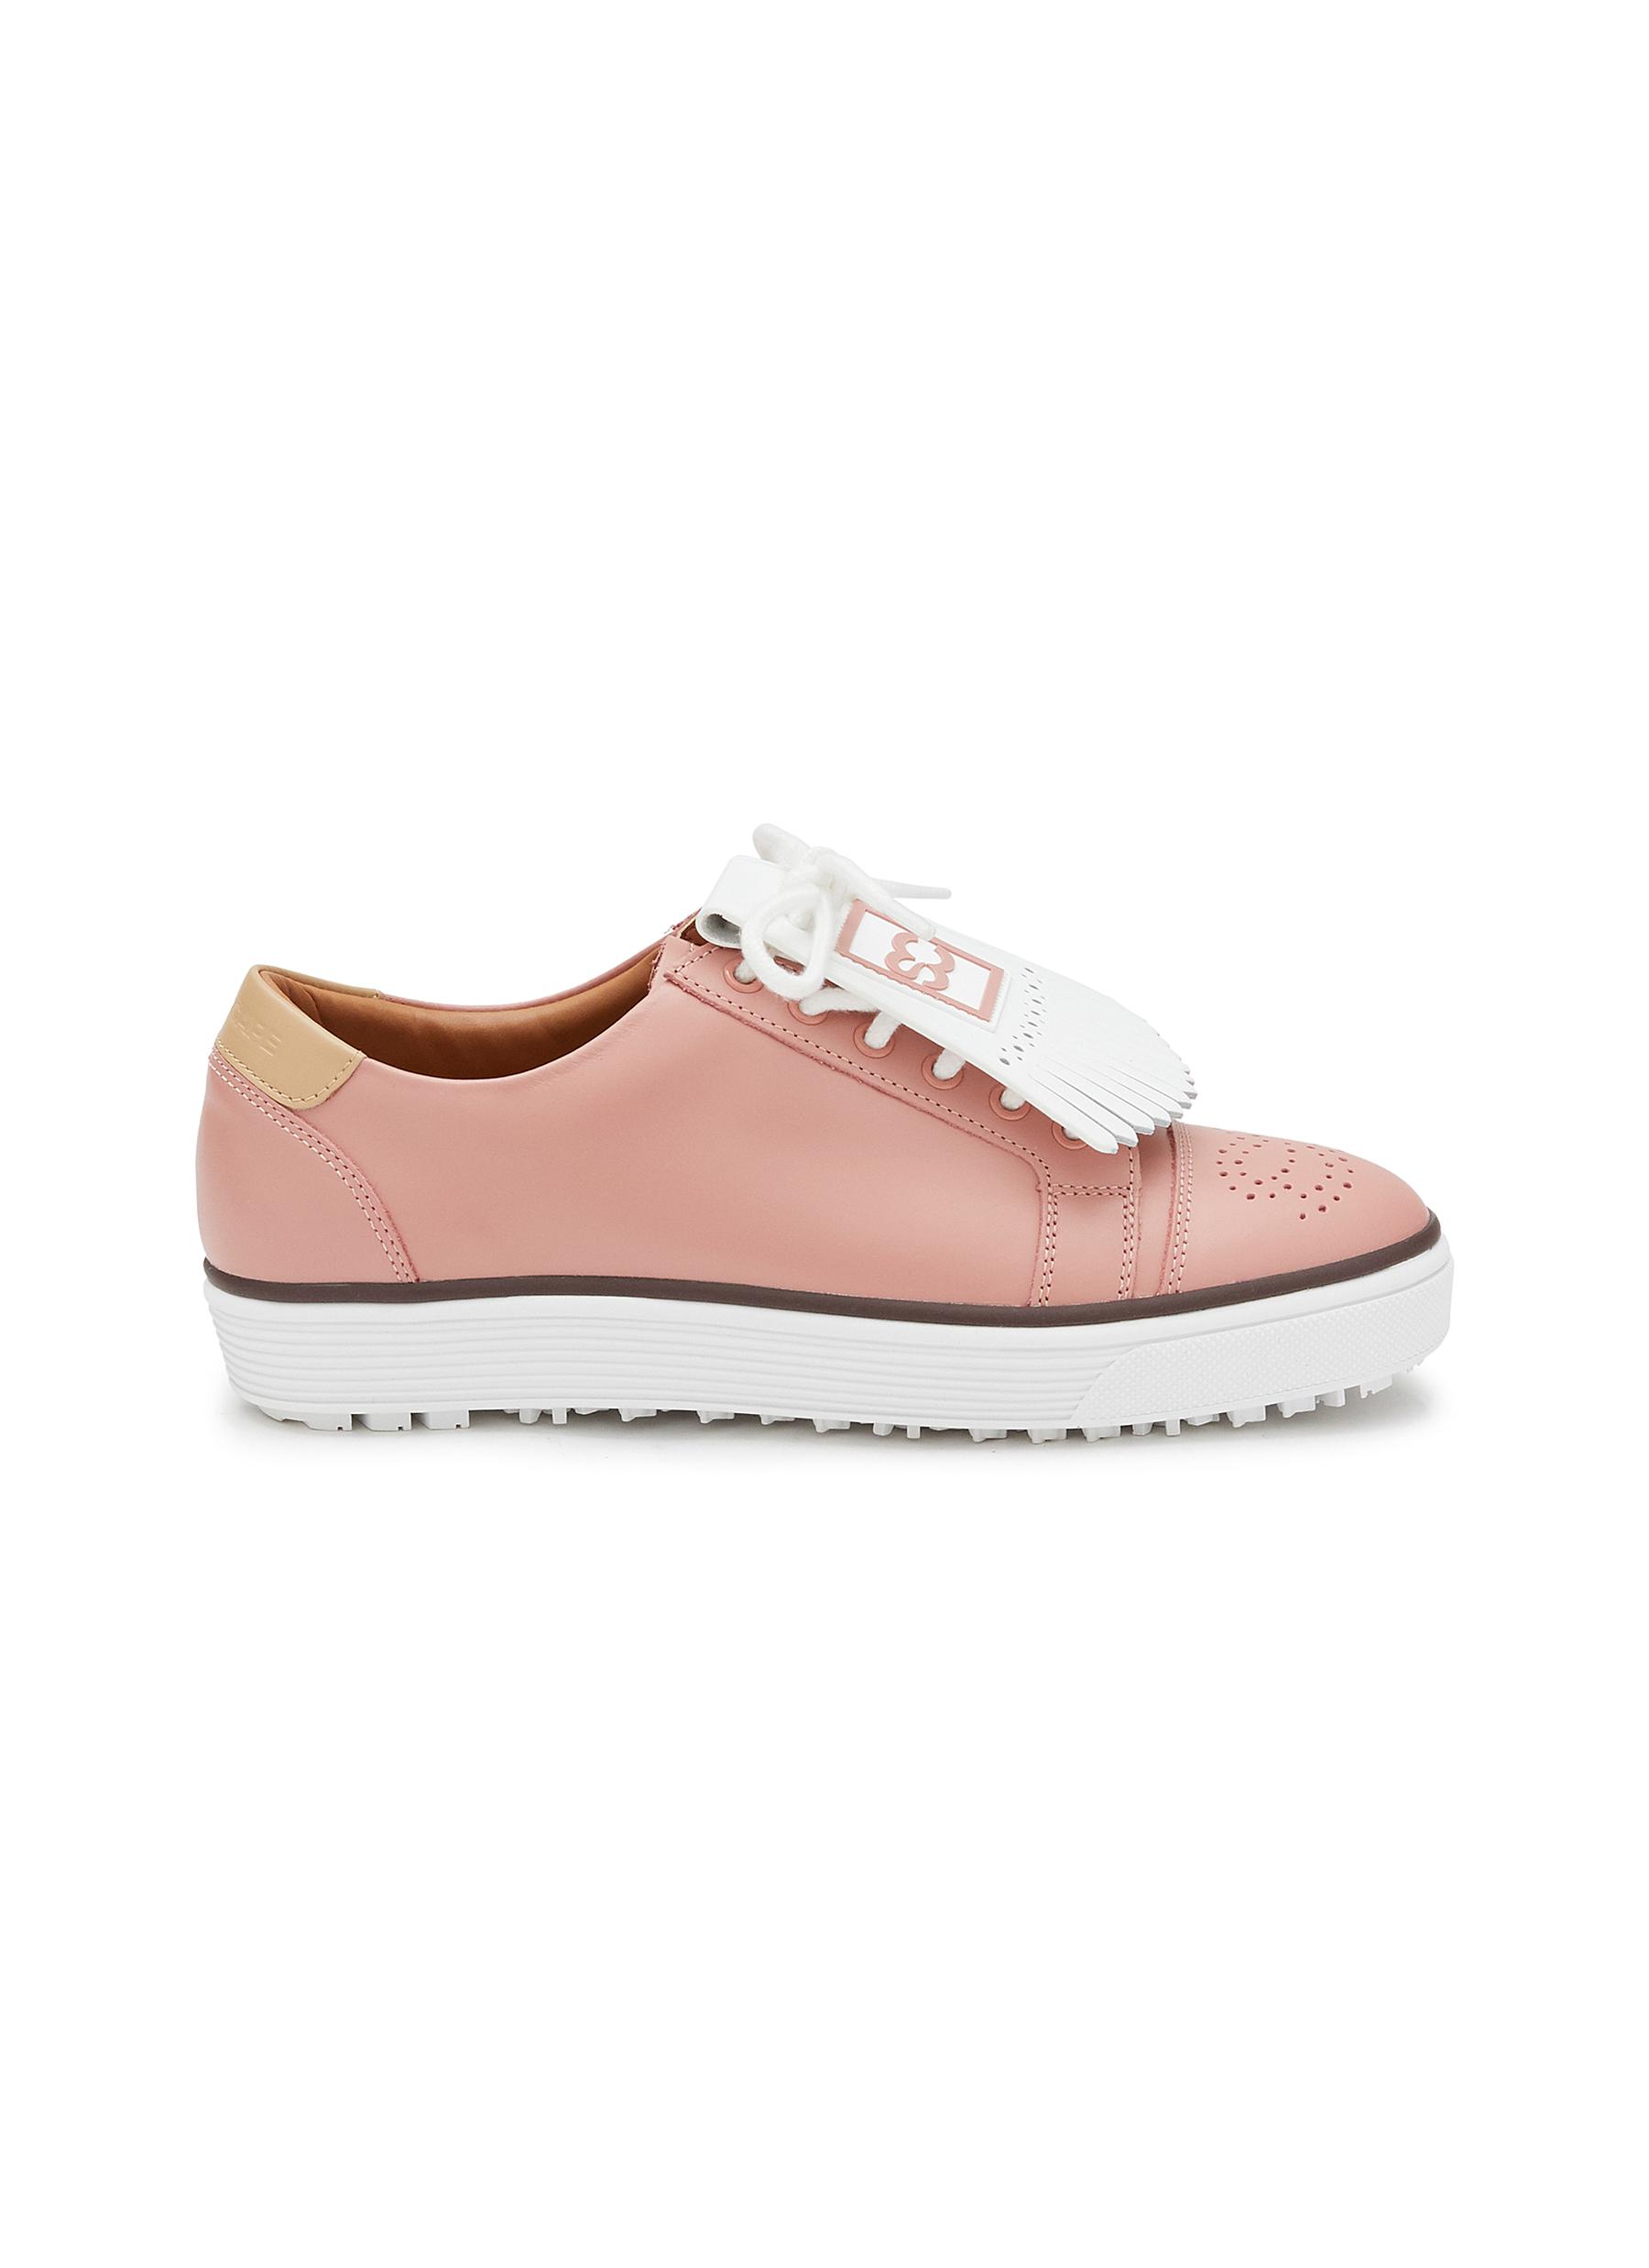 Southcape Removable Tassels Leather Sneakers In Pink